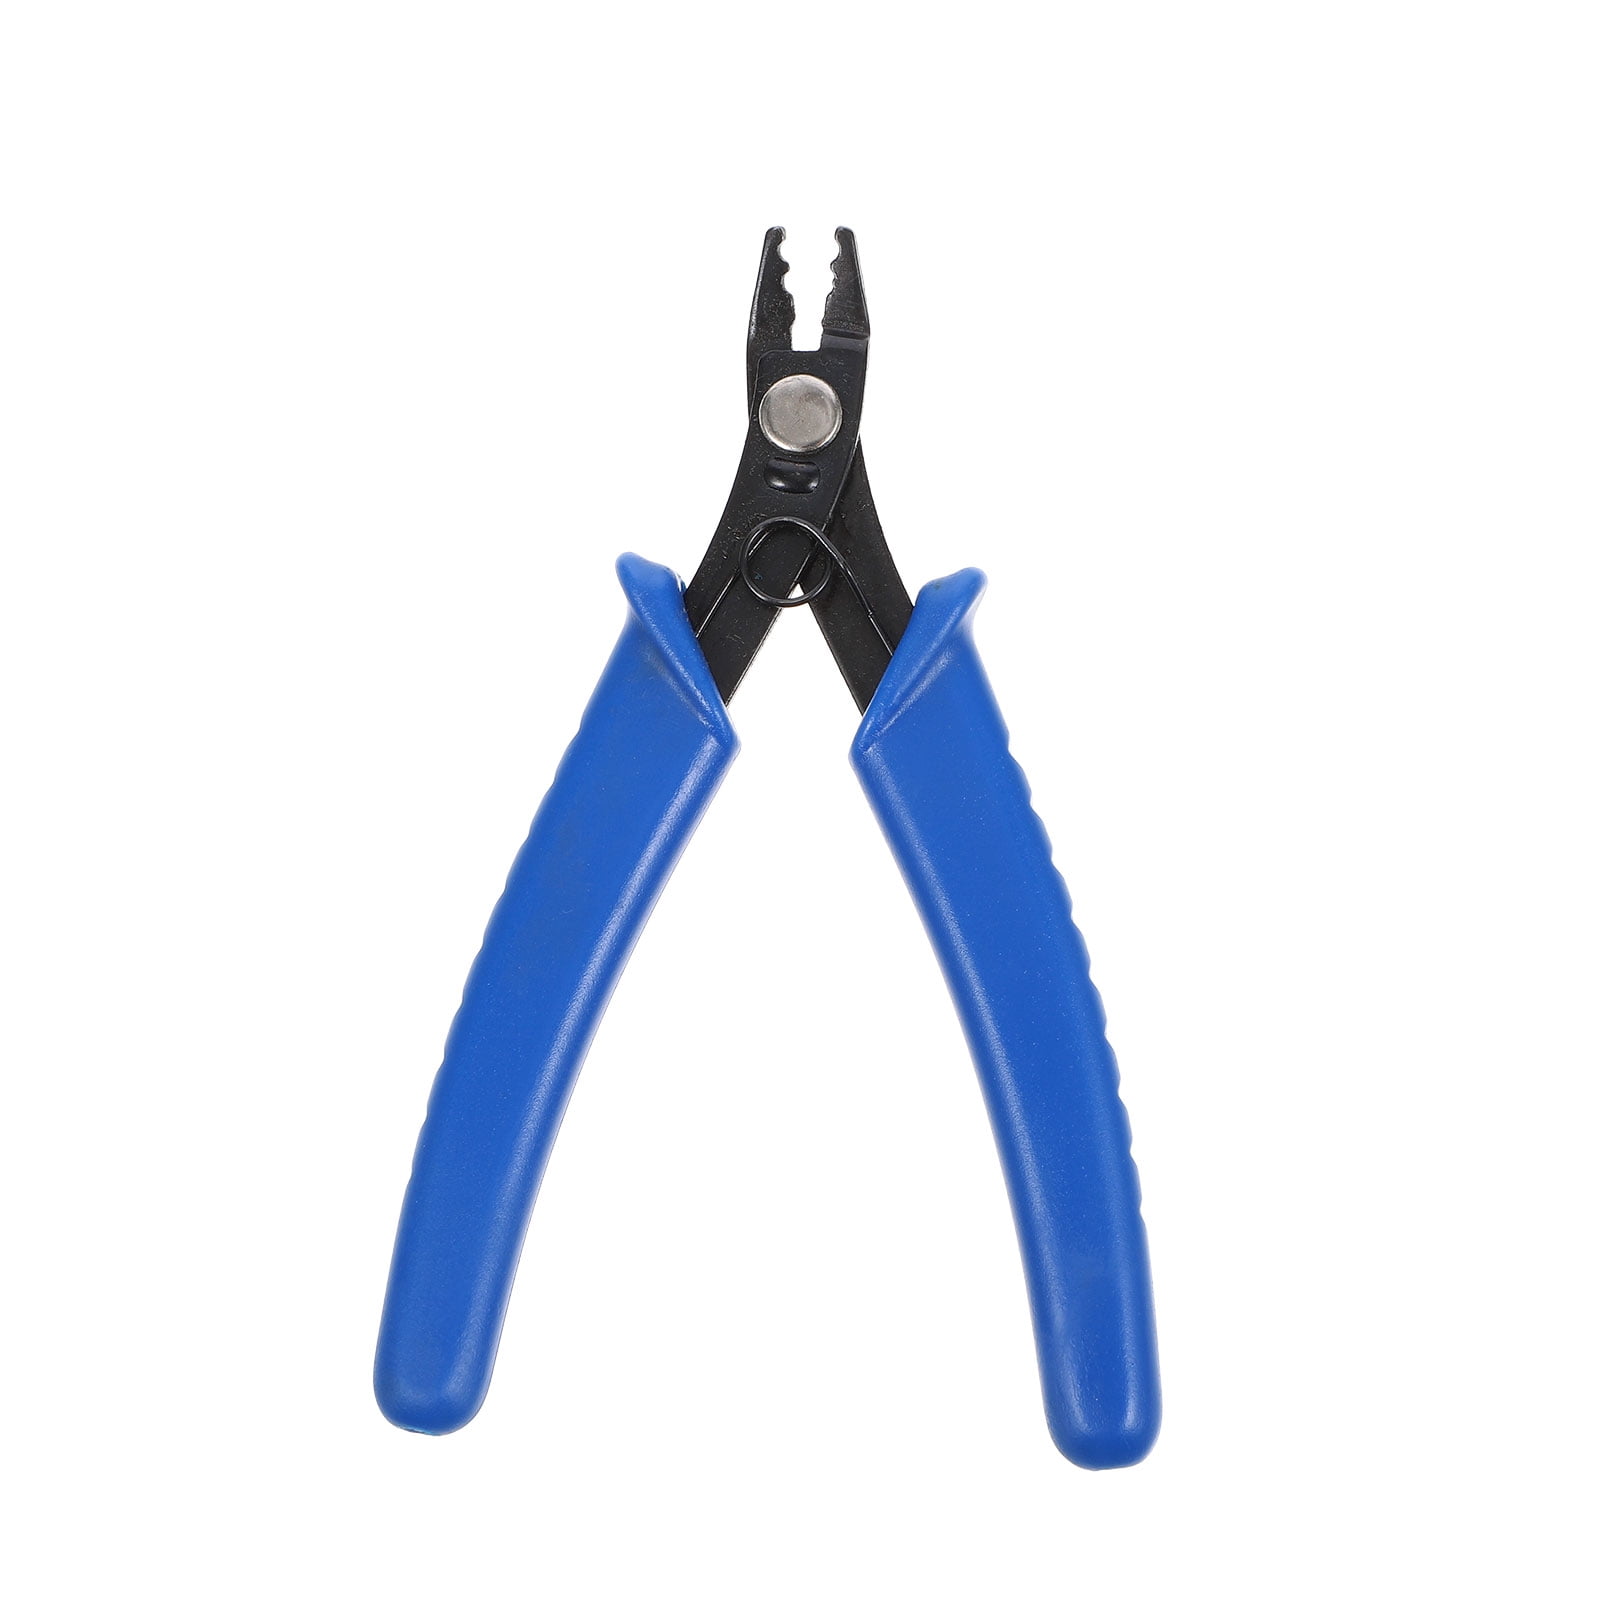 Carbon Steel Bead Crimper Pliers Bead Crimping Tool Jewelry Making